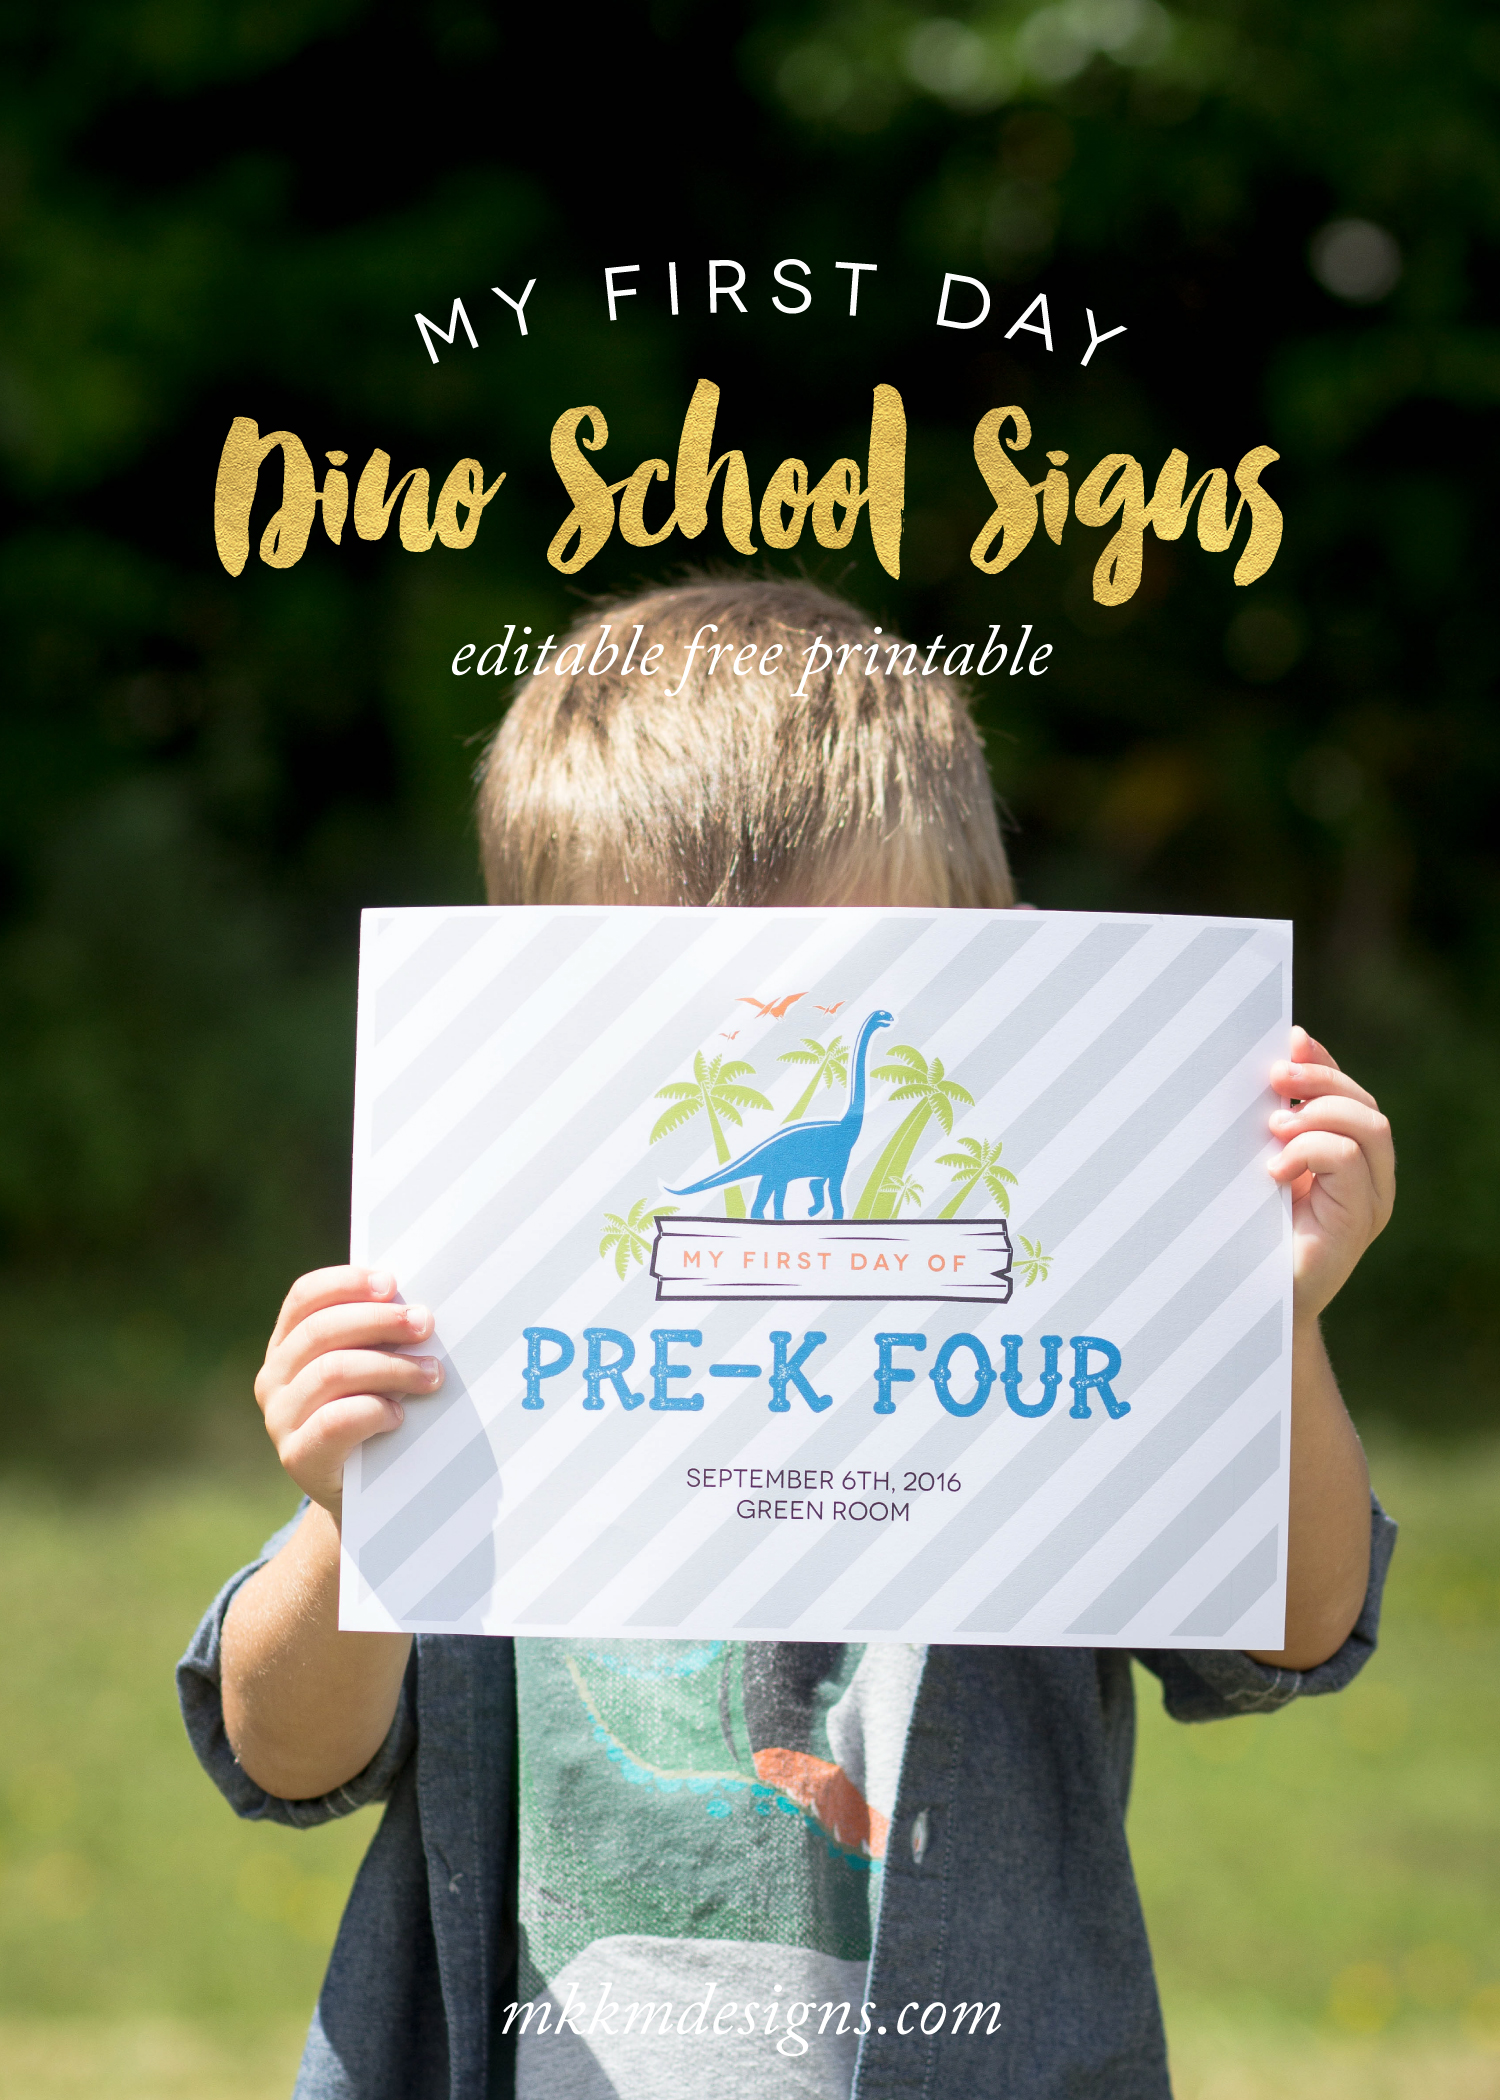 My First Day of School Dinosaur sign. Free printables from shopmkkm.com